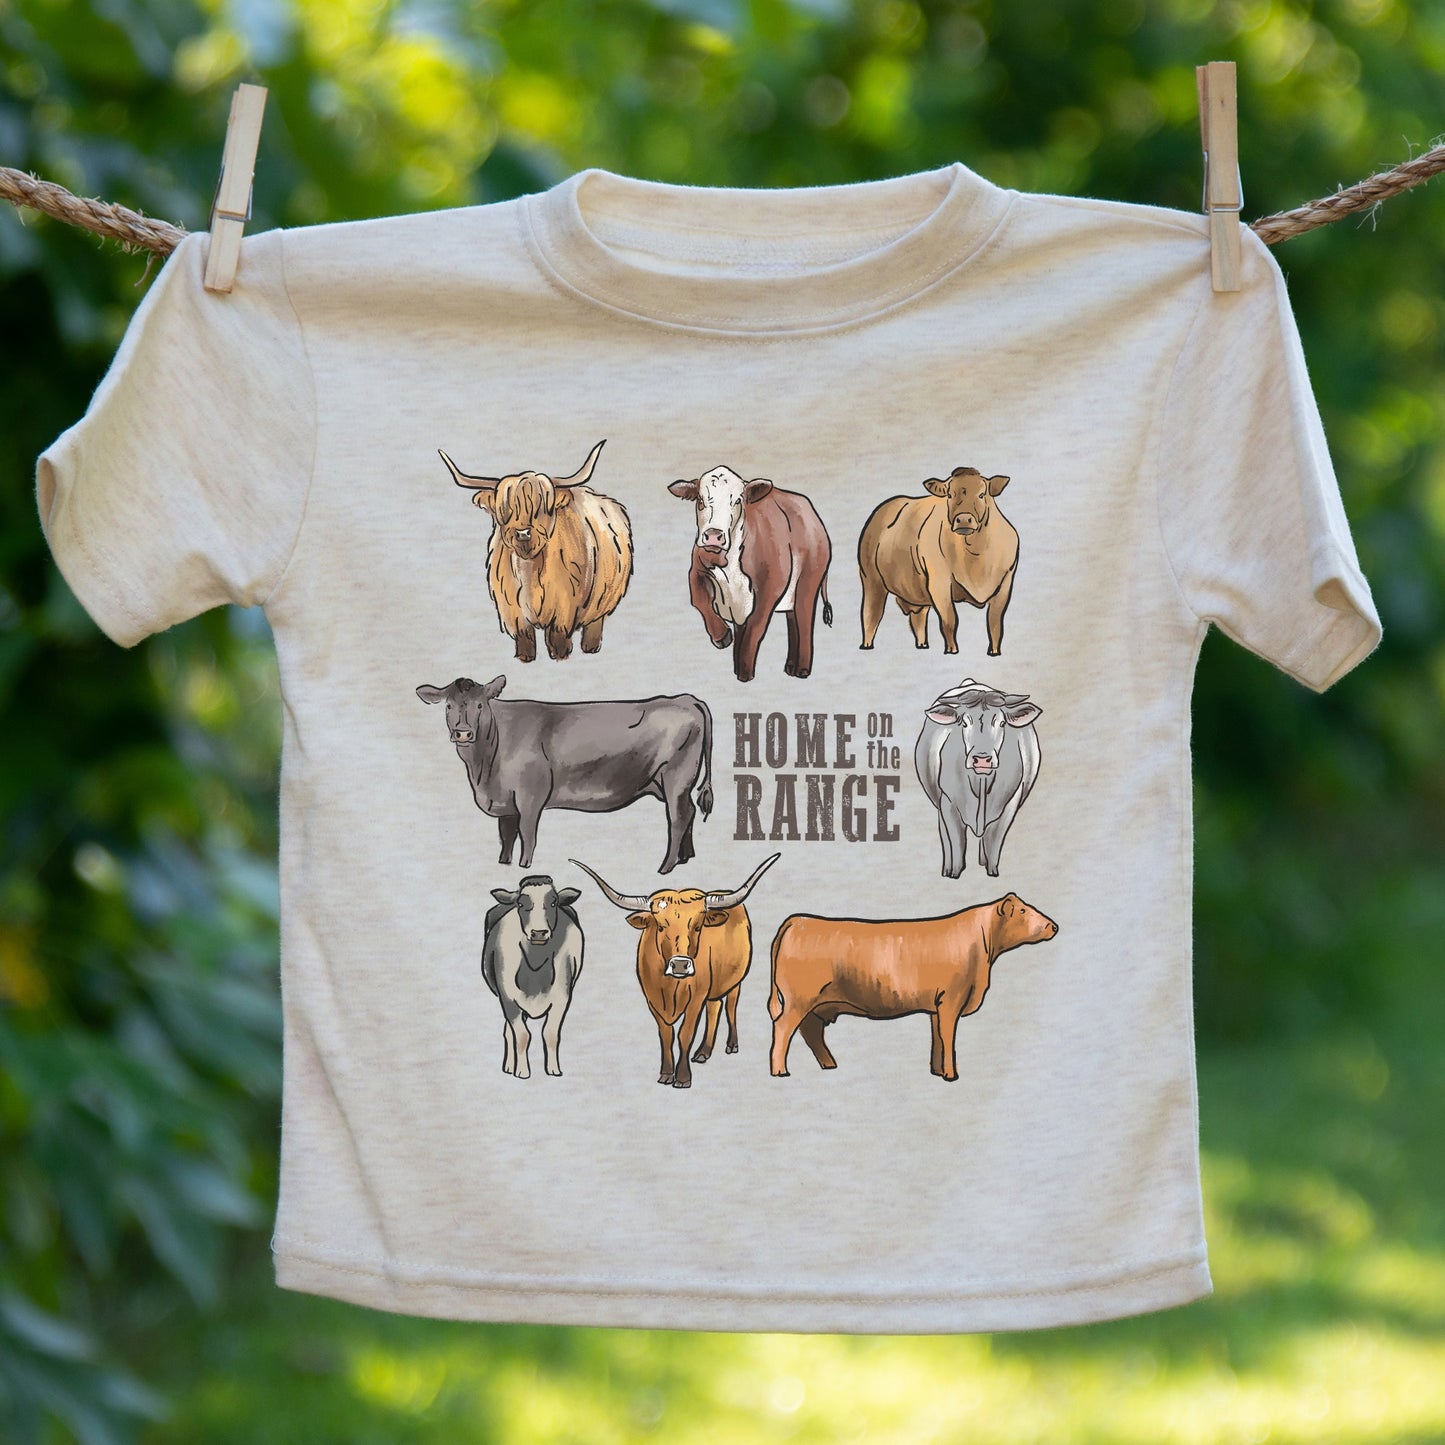 "Home on the range" Beige Toddler or Youth T-Shirt | Western Line